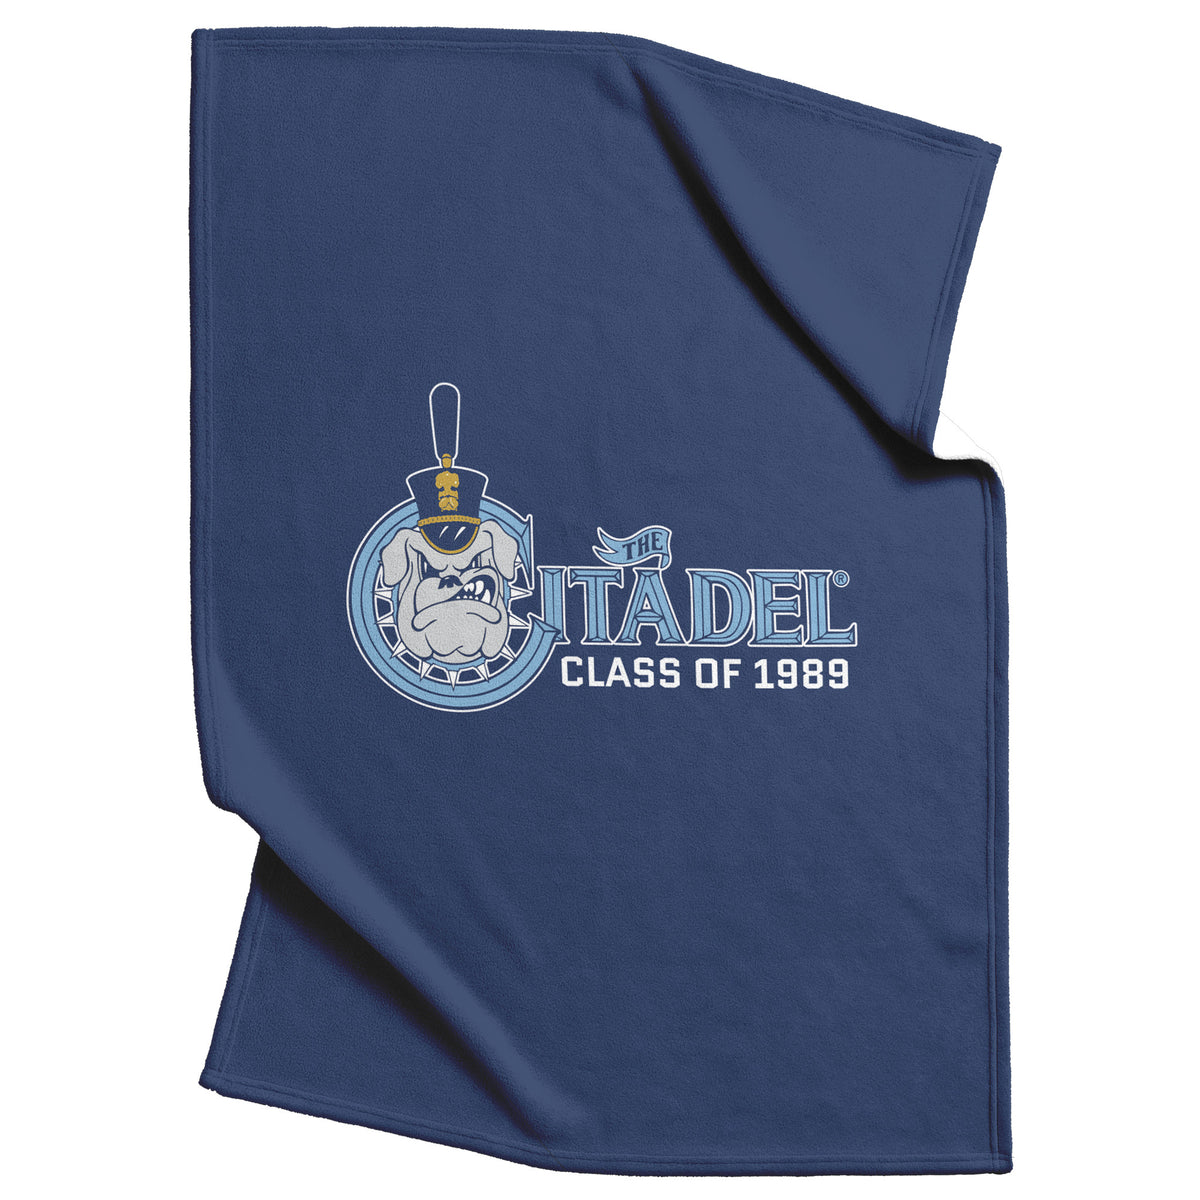 The Citadel Spike, Class of 1989 Blanket